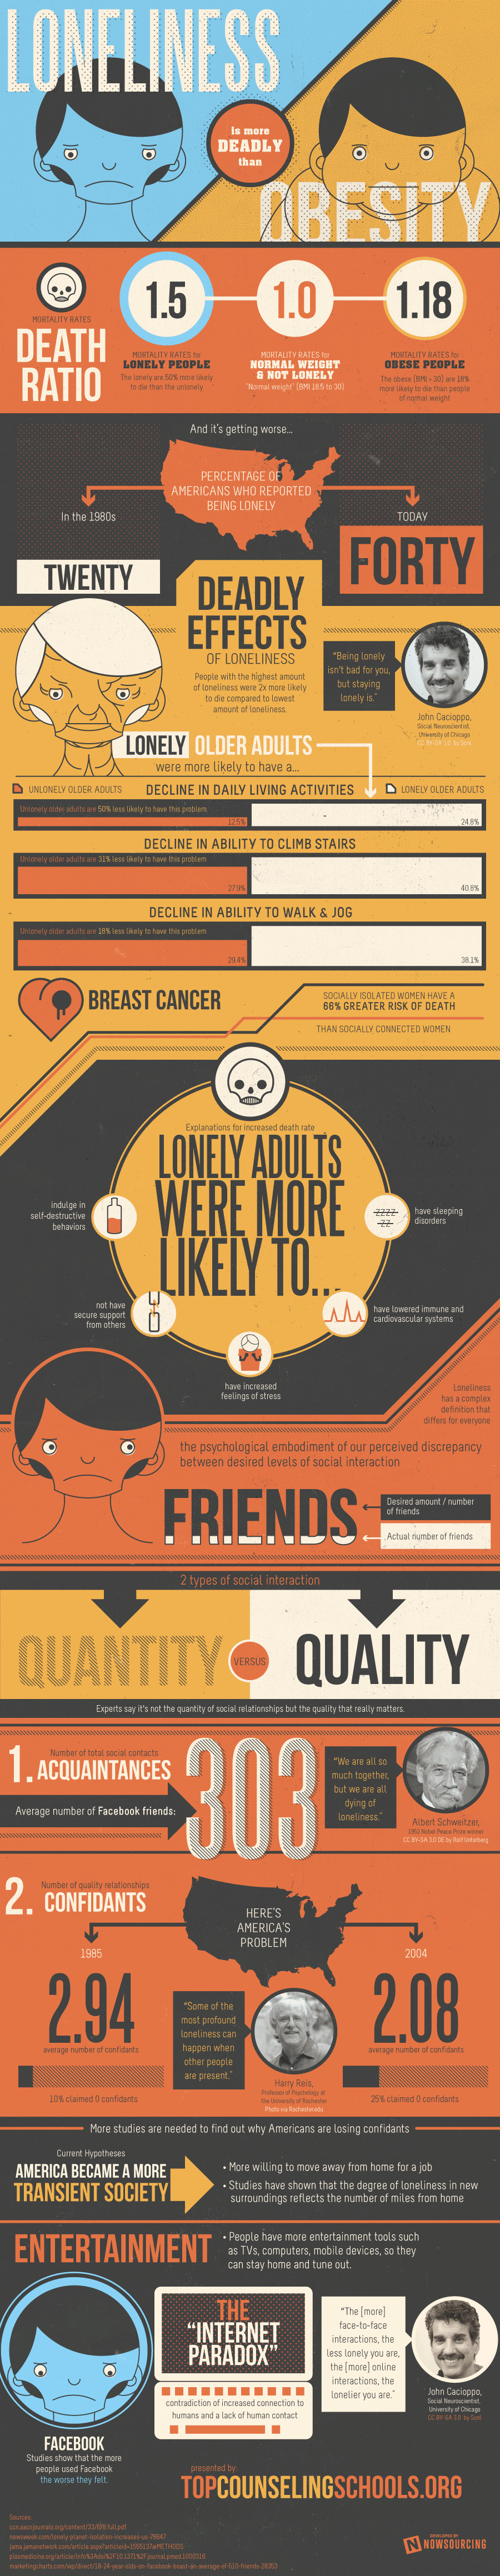 loneliness-vs-obesity.png